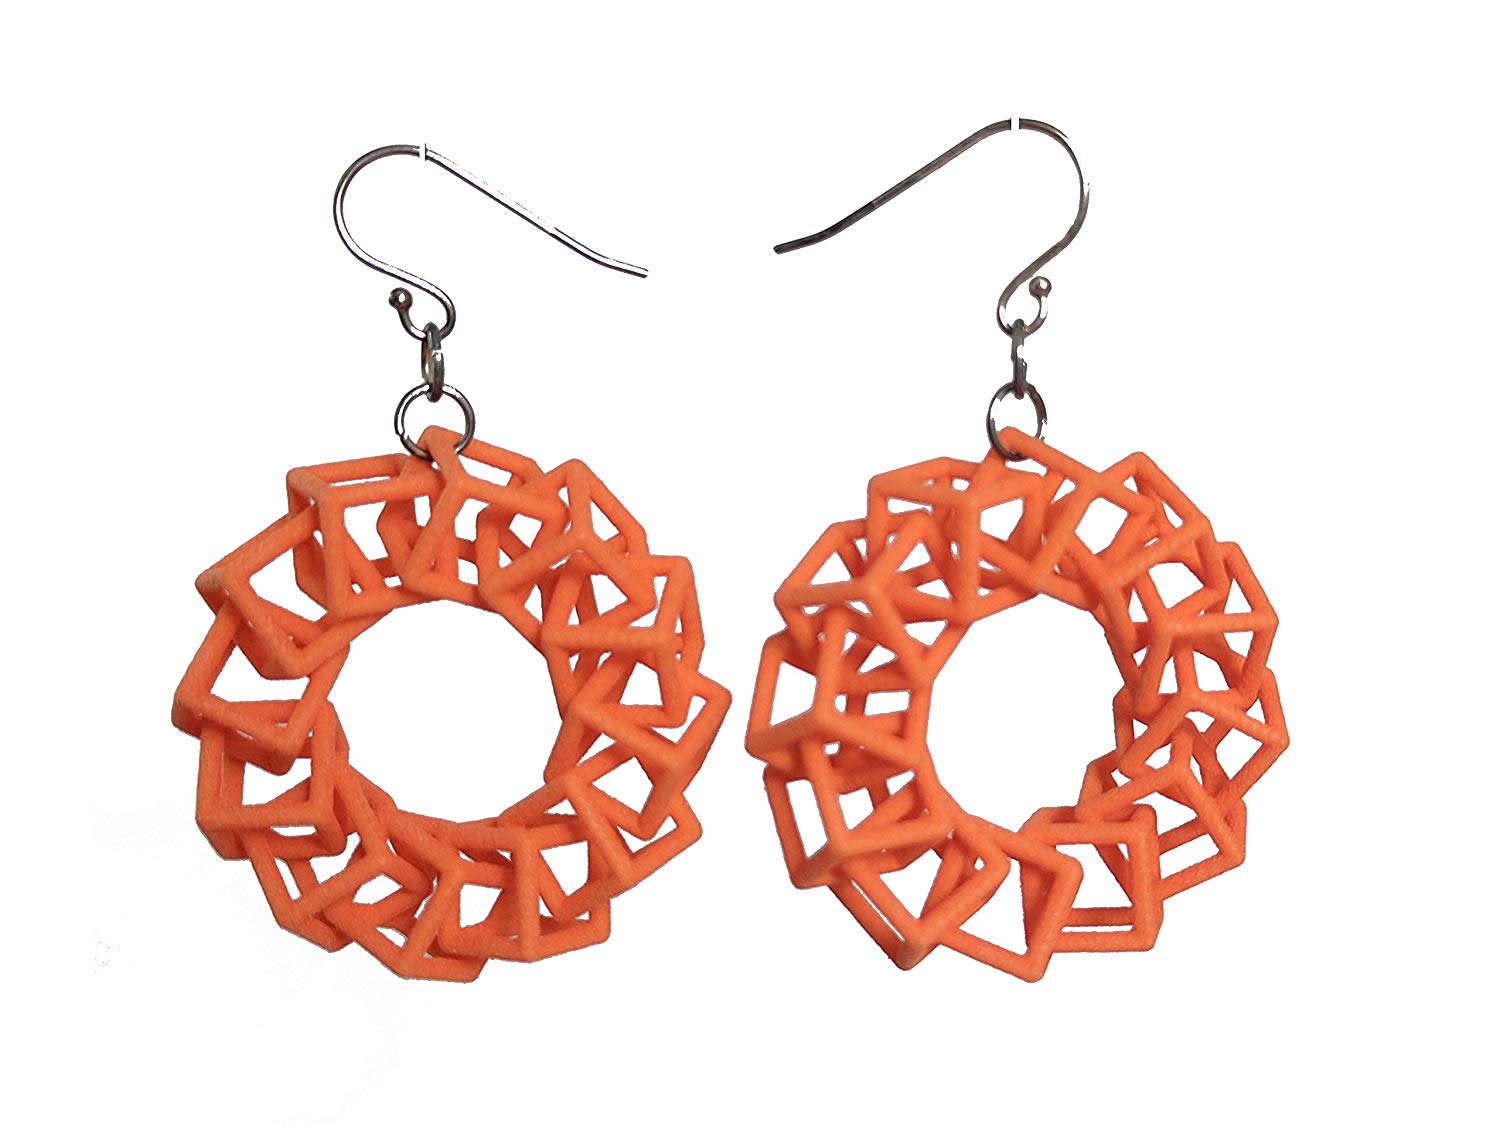 3D Printed Jewelry Cube Ring Earrings